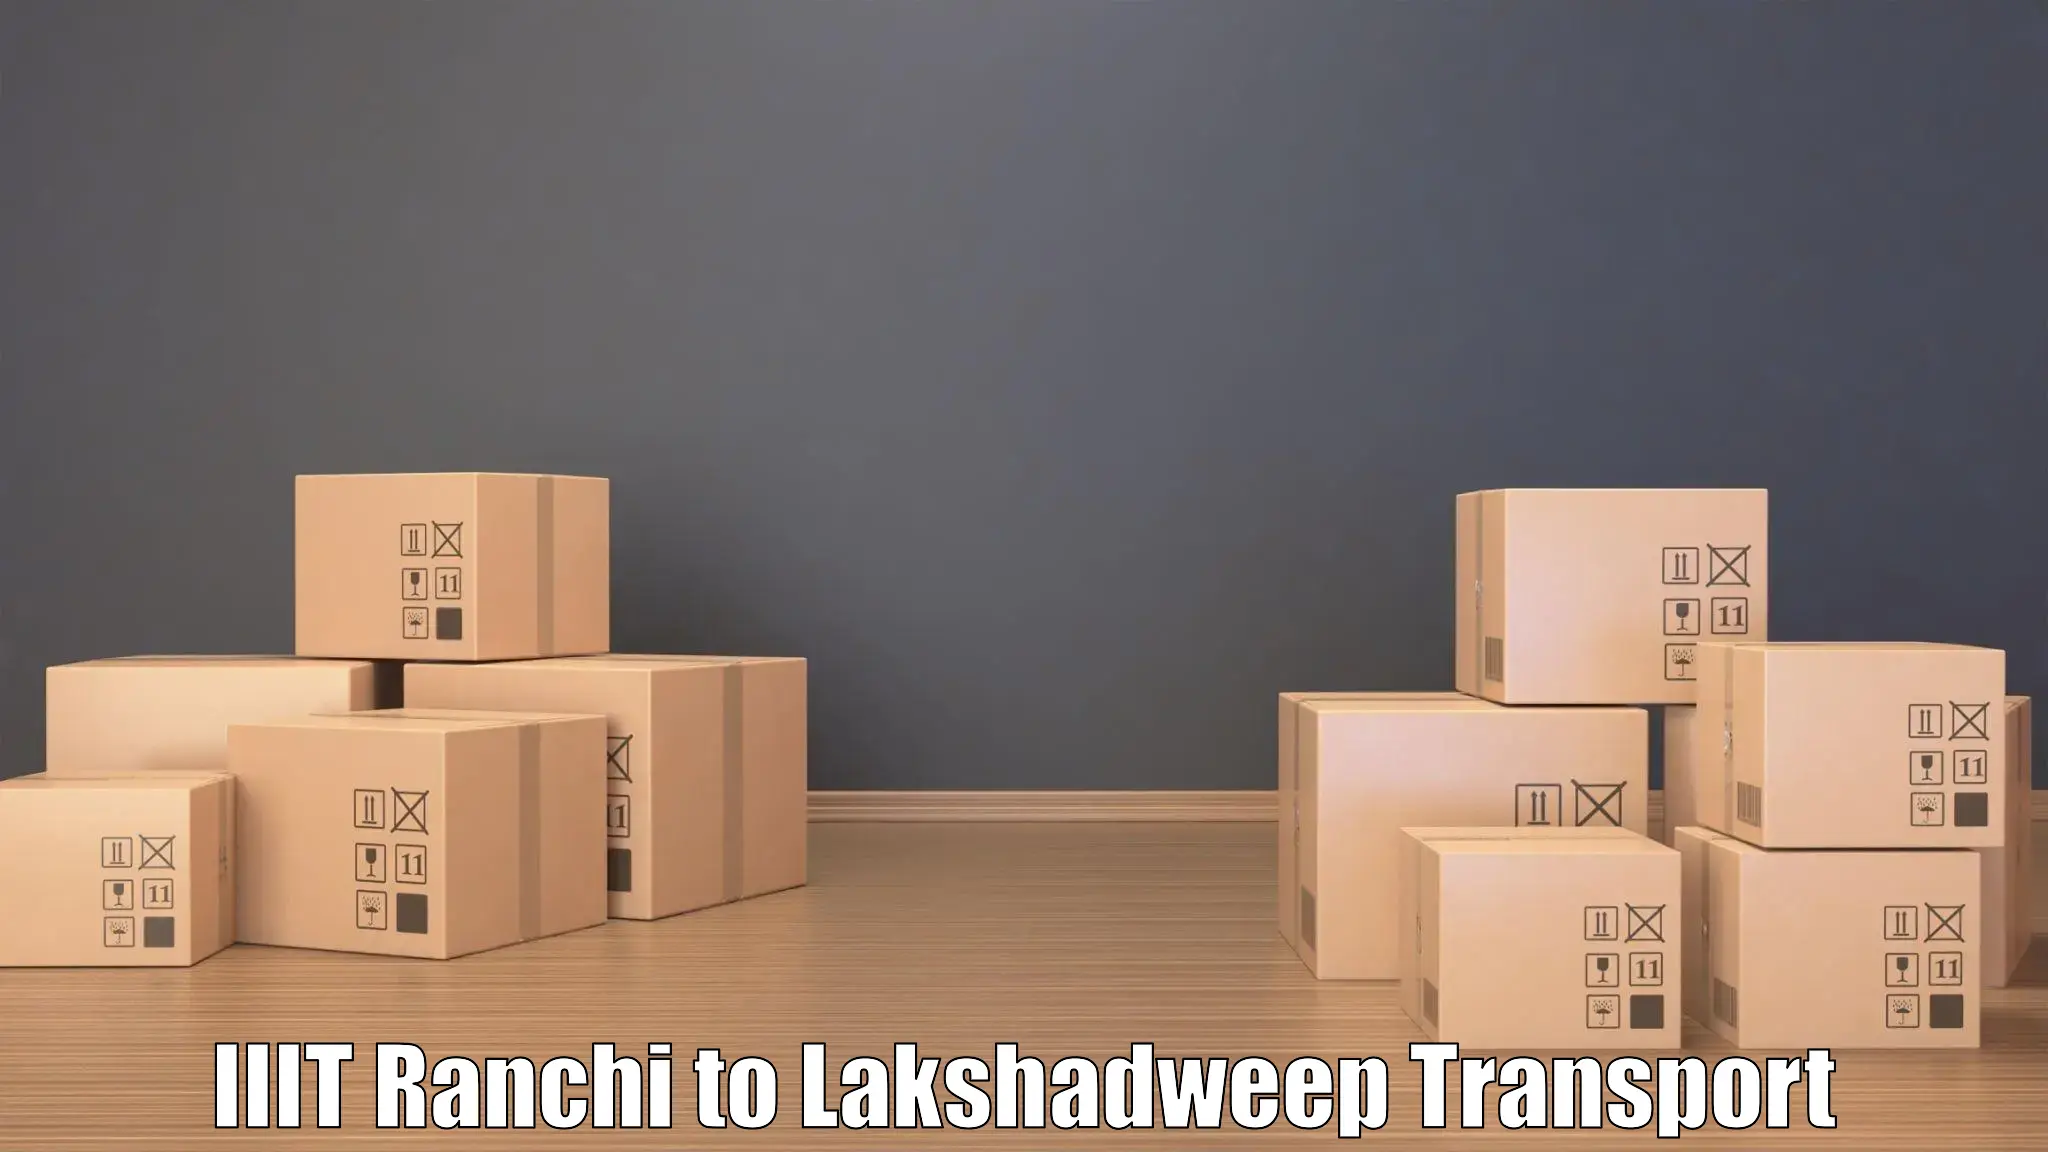 Express transport services IIIT Ranchi to Lakshadweep